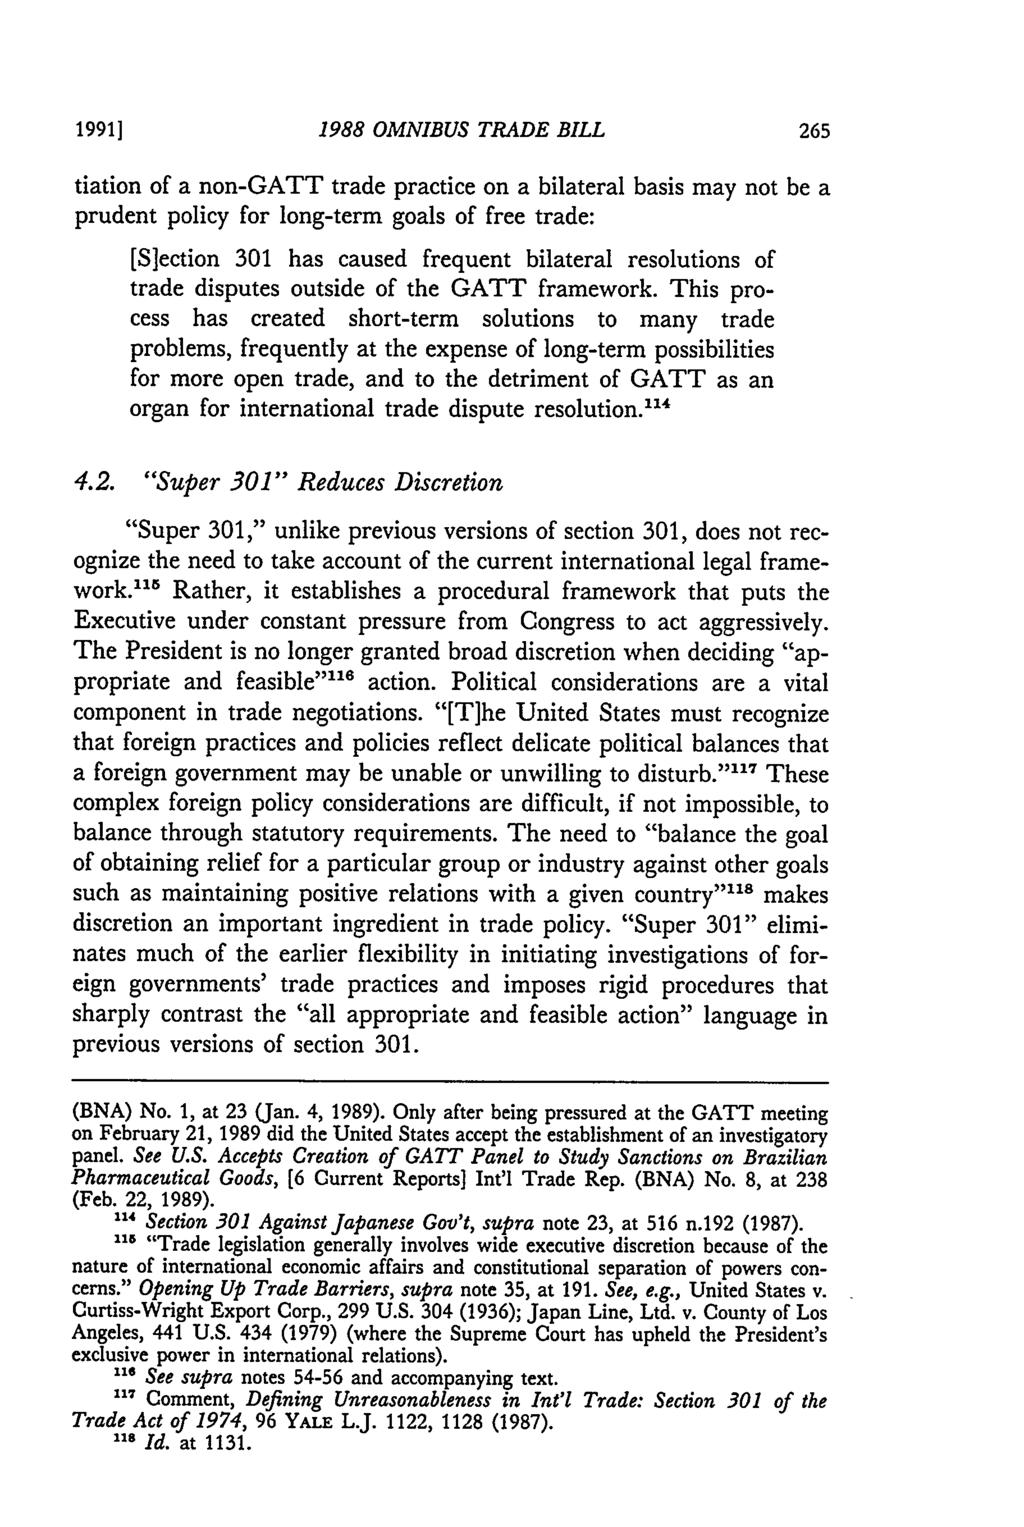 1991] 1988 OMNIBUS TRADE BILL tiation of a non-gatt trade practice on a bilateral basis may not be a prudent policy for long-term goals of free trade: [S]ection 301 has caused frequent bilateral